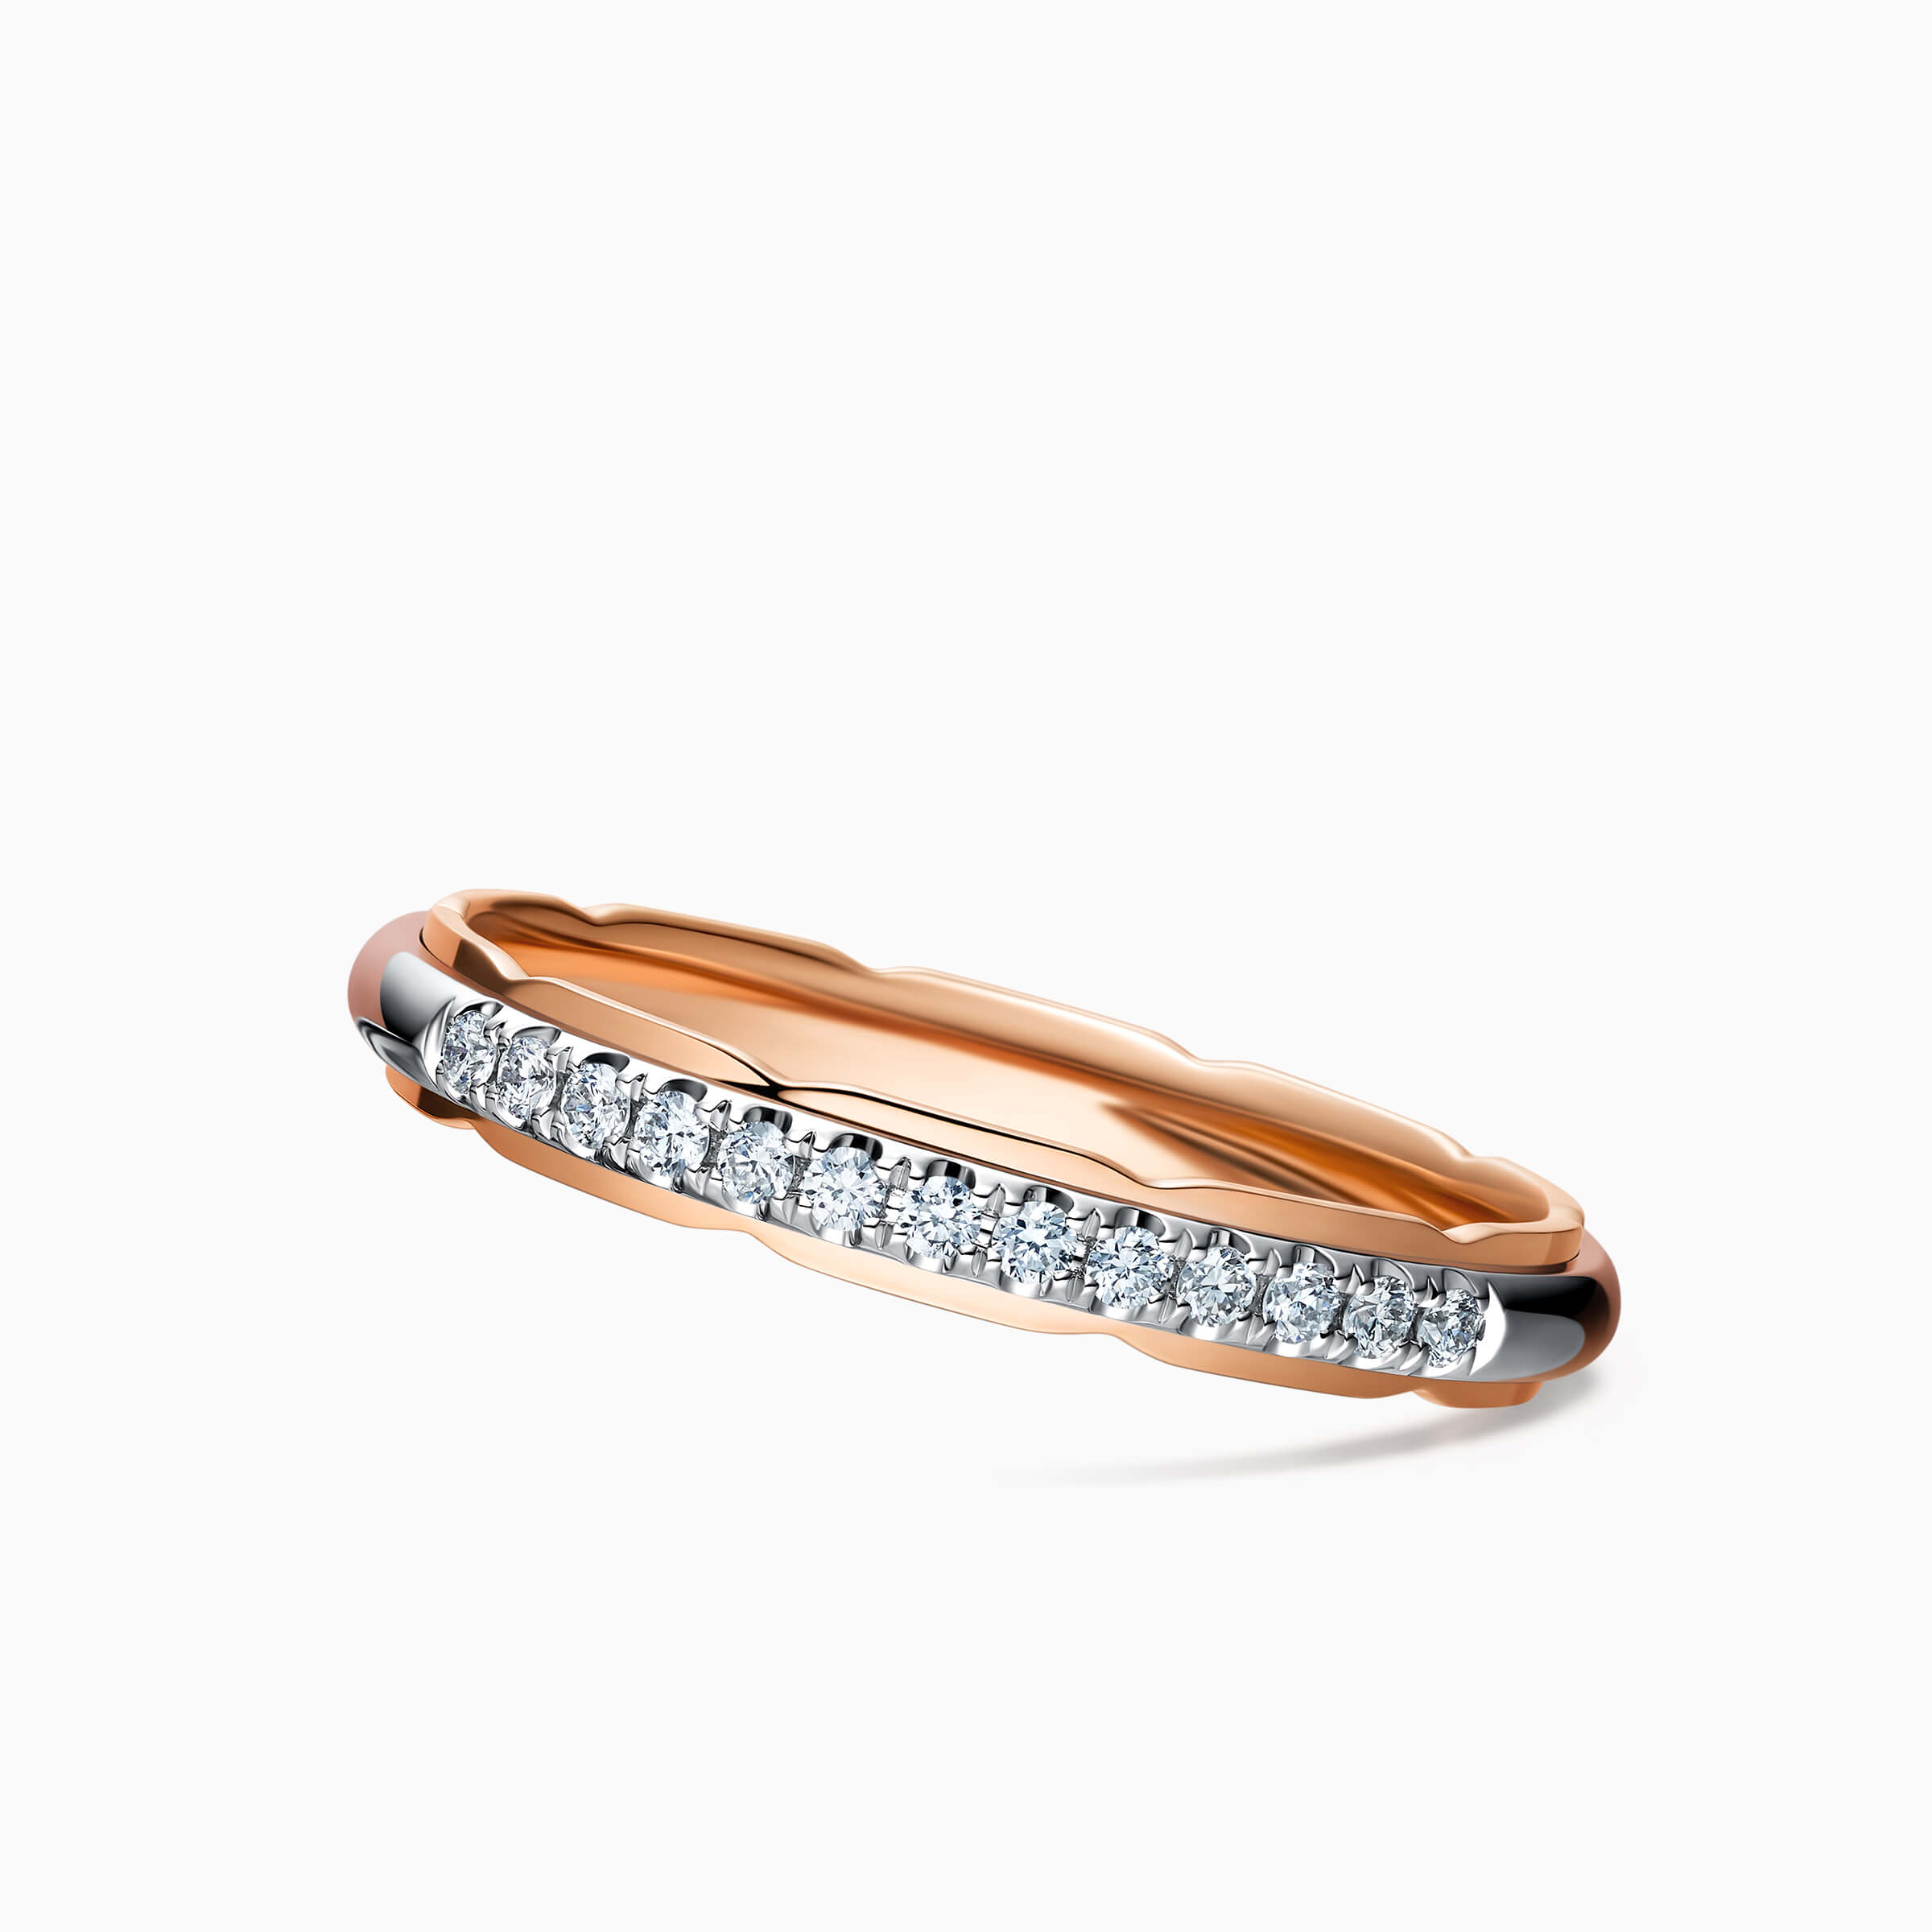 Darry Ring two toned wedding ring for her